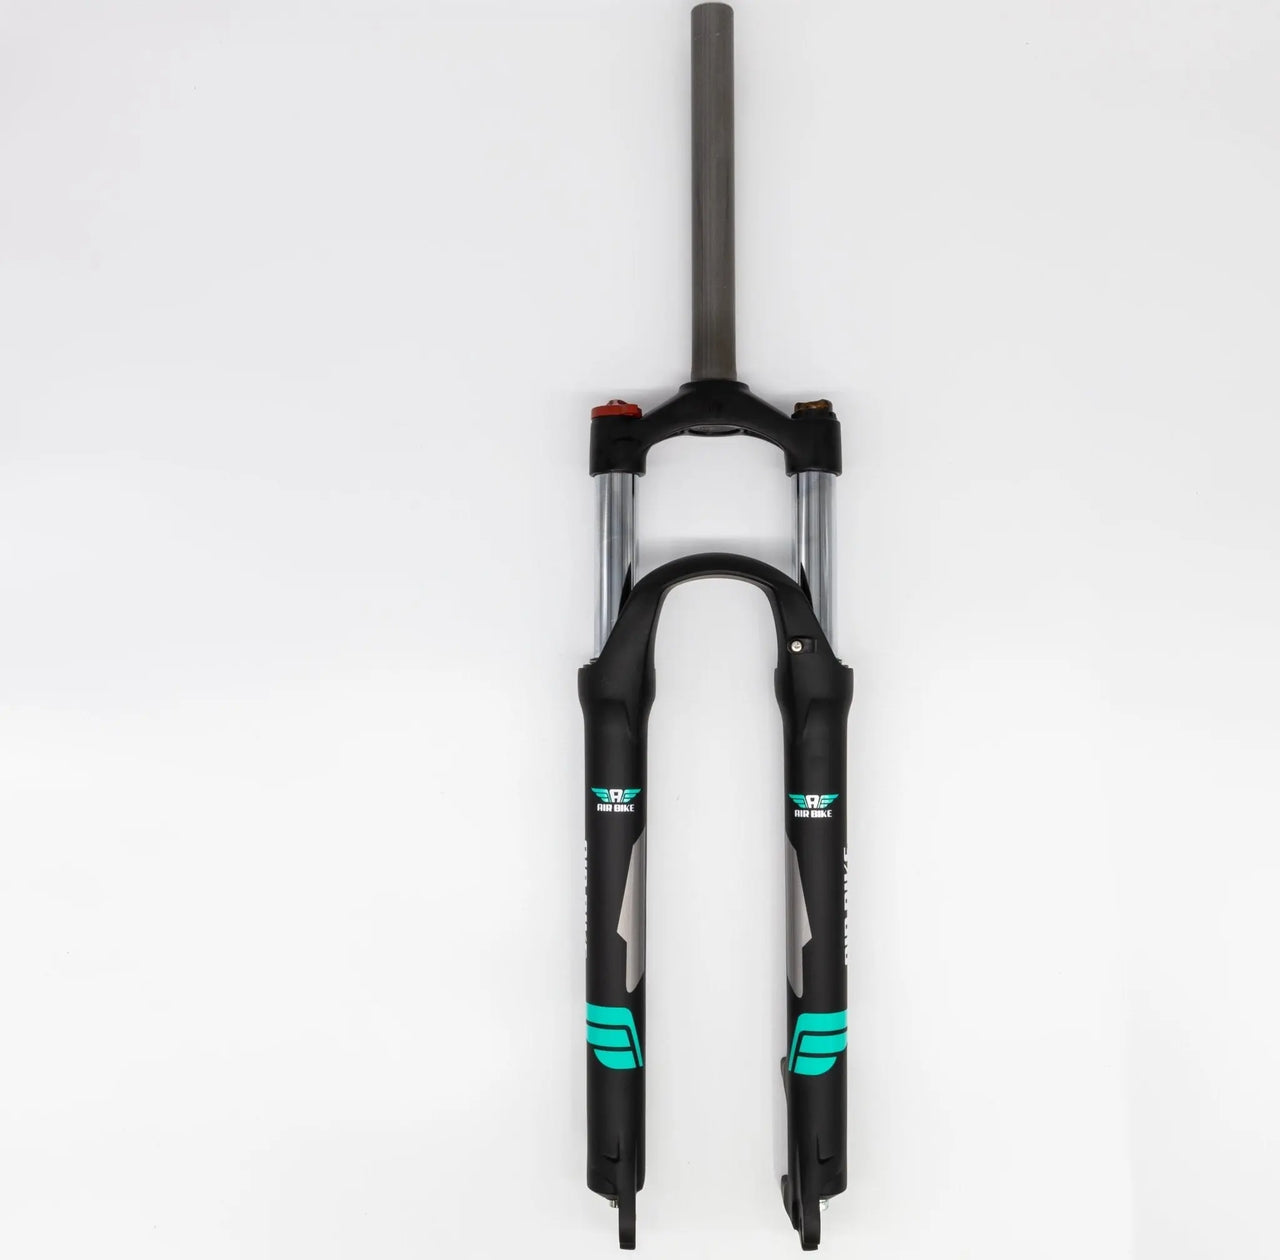 26 Inch Tapered Suspension Fork Black Air Bike XC28 100mm Travel & Lockout Mountain Bike Quick Release Fork - Air Bike